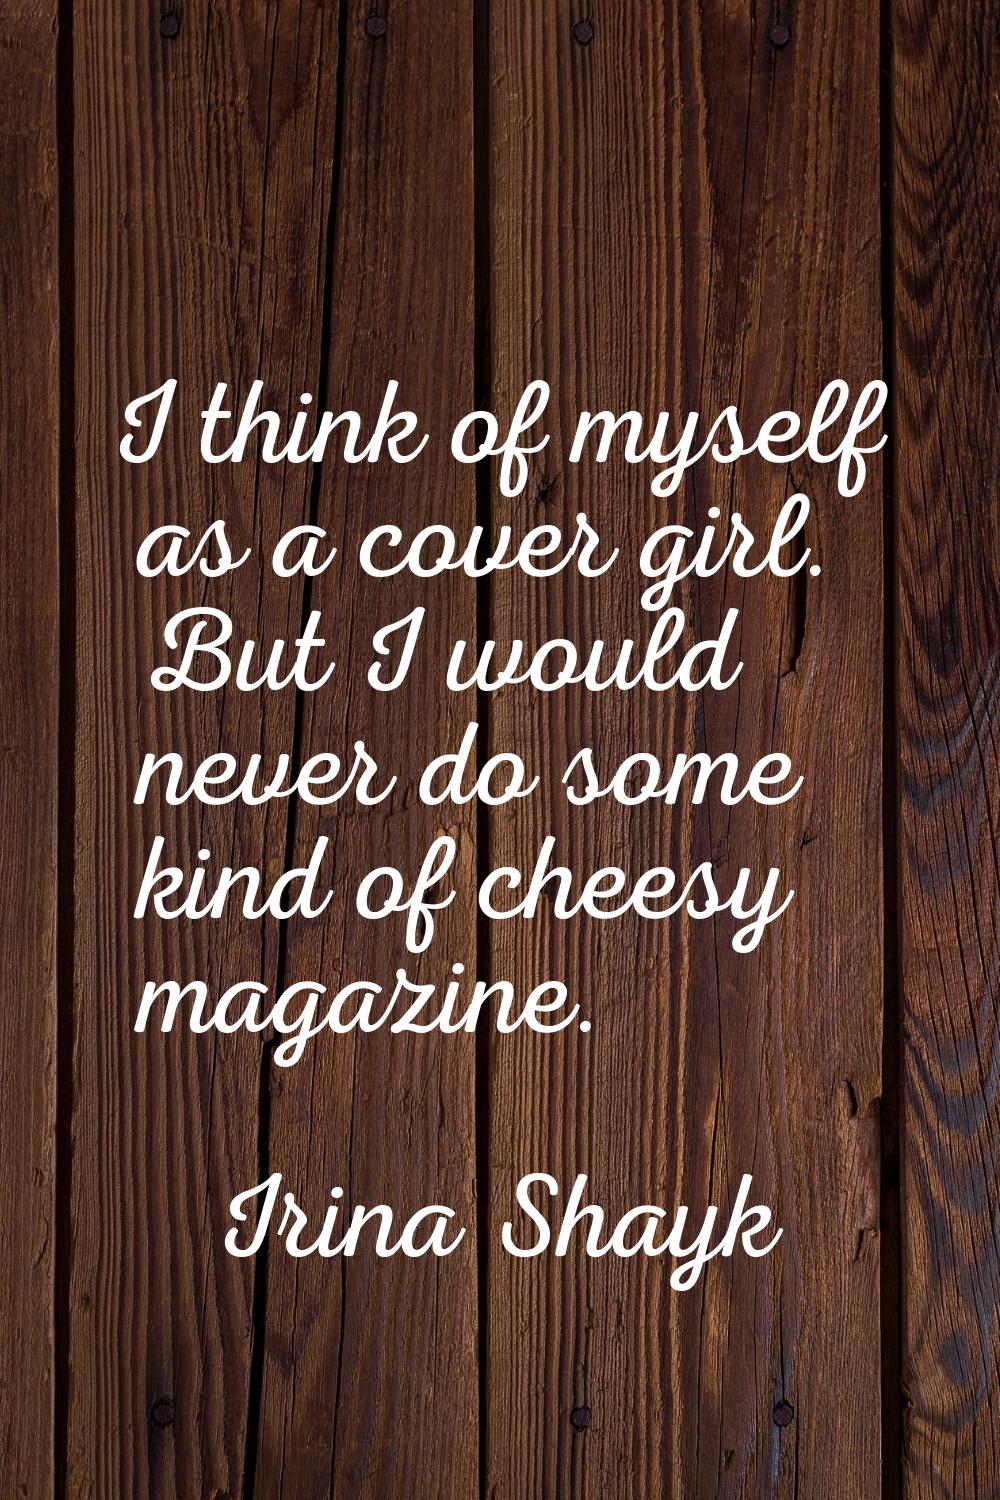 I think of myself as a cover girl. But I would never do some kind of cheesy magazine.